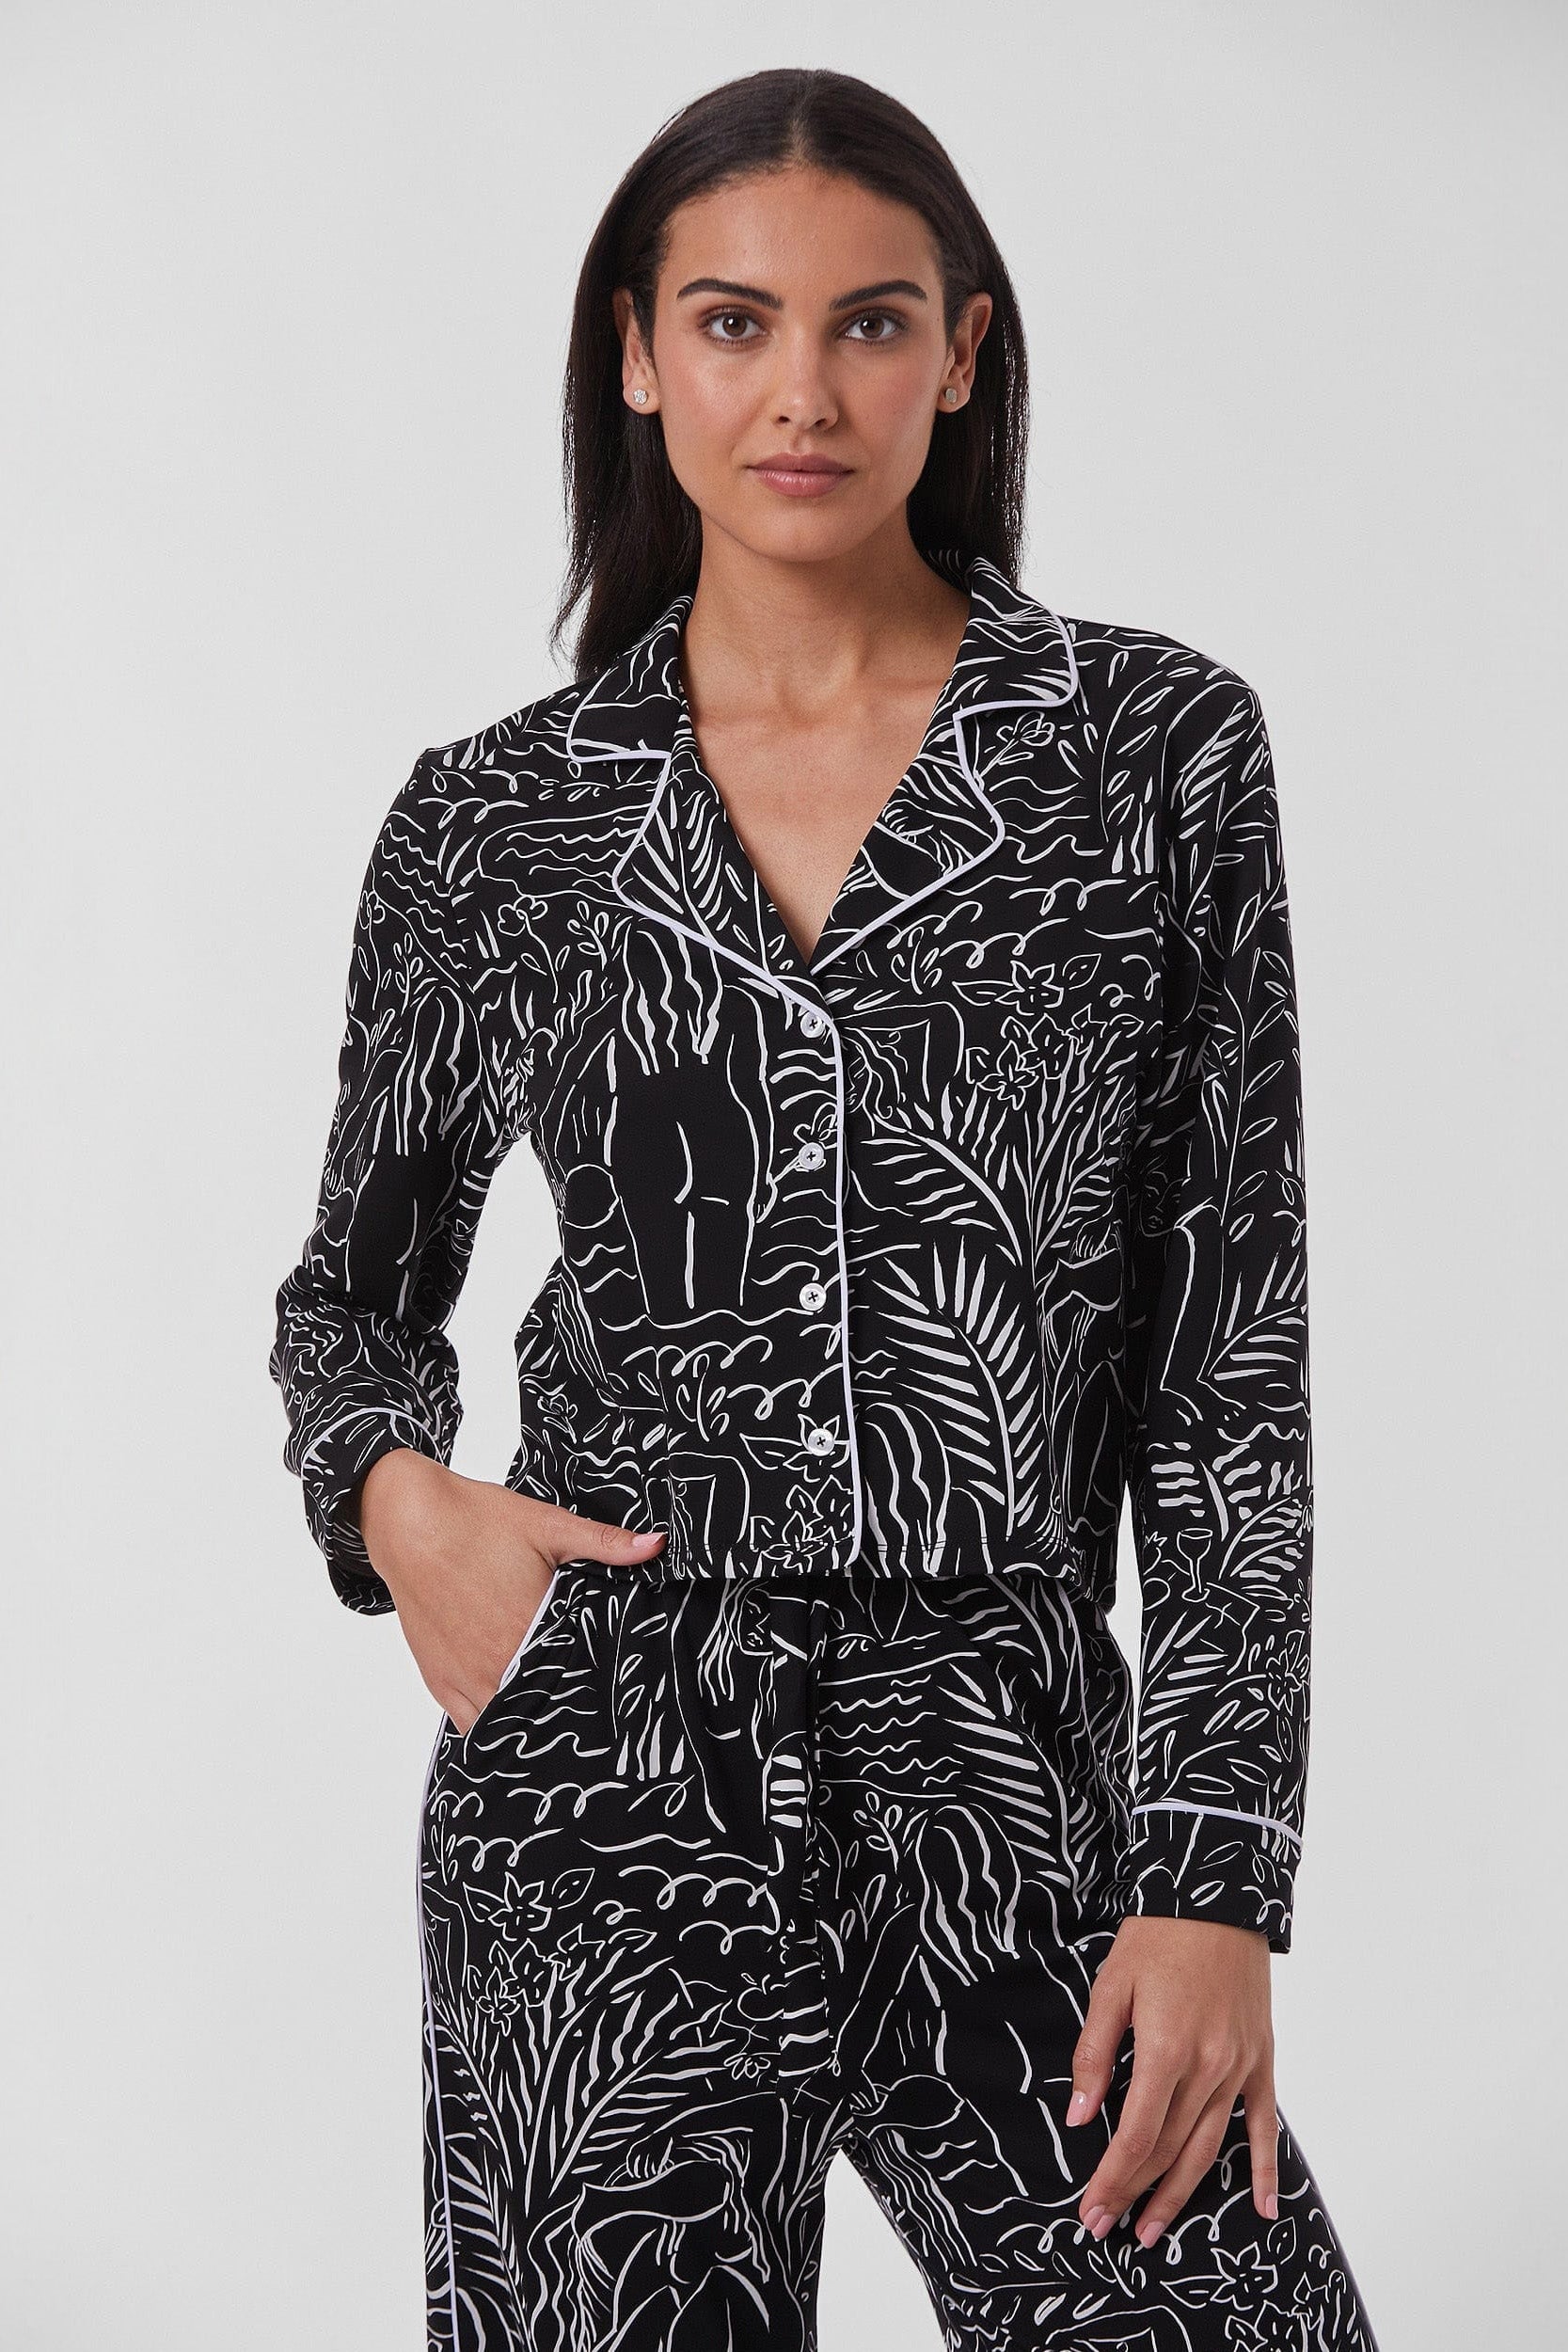 A woman with long, straight black hair stands against a plain background. She is wearing the Venus Pajama Soft Long Shirt, featuring white line art designs and white piping on the collar and cuffs, evoking a classic sleepwear style. With one hand in her pocket, she gazes at the camera with a neutral expression.